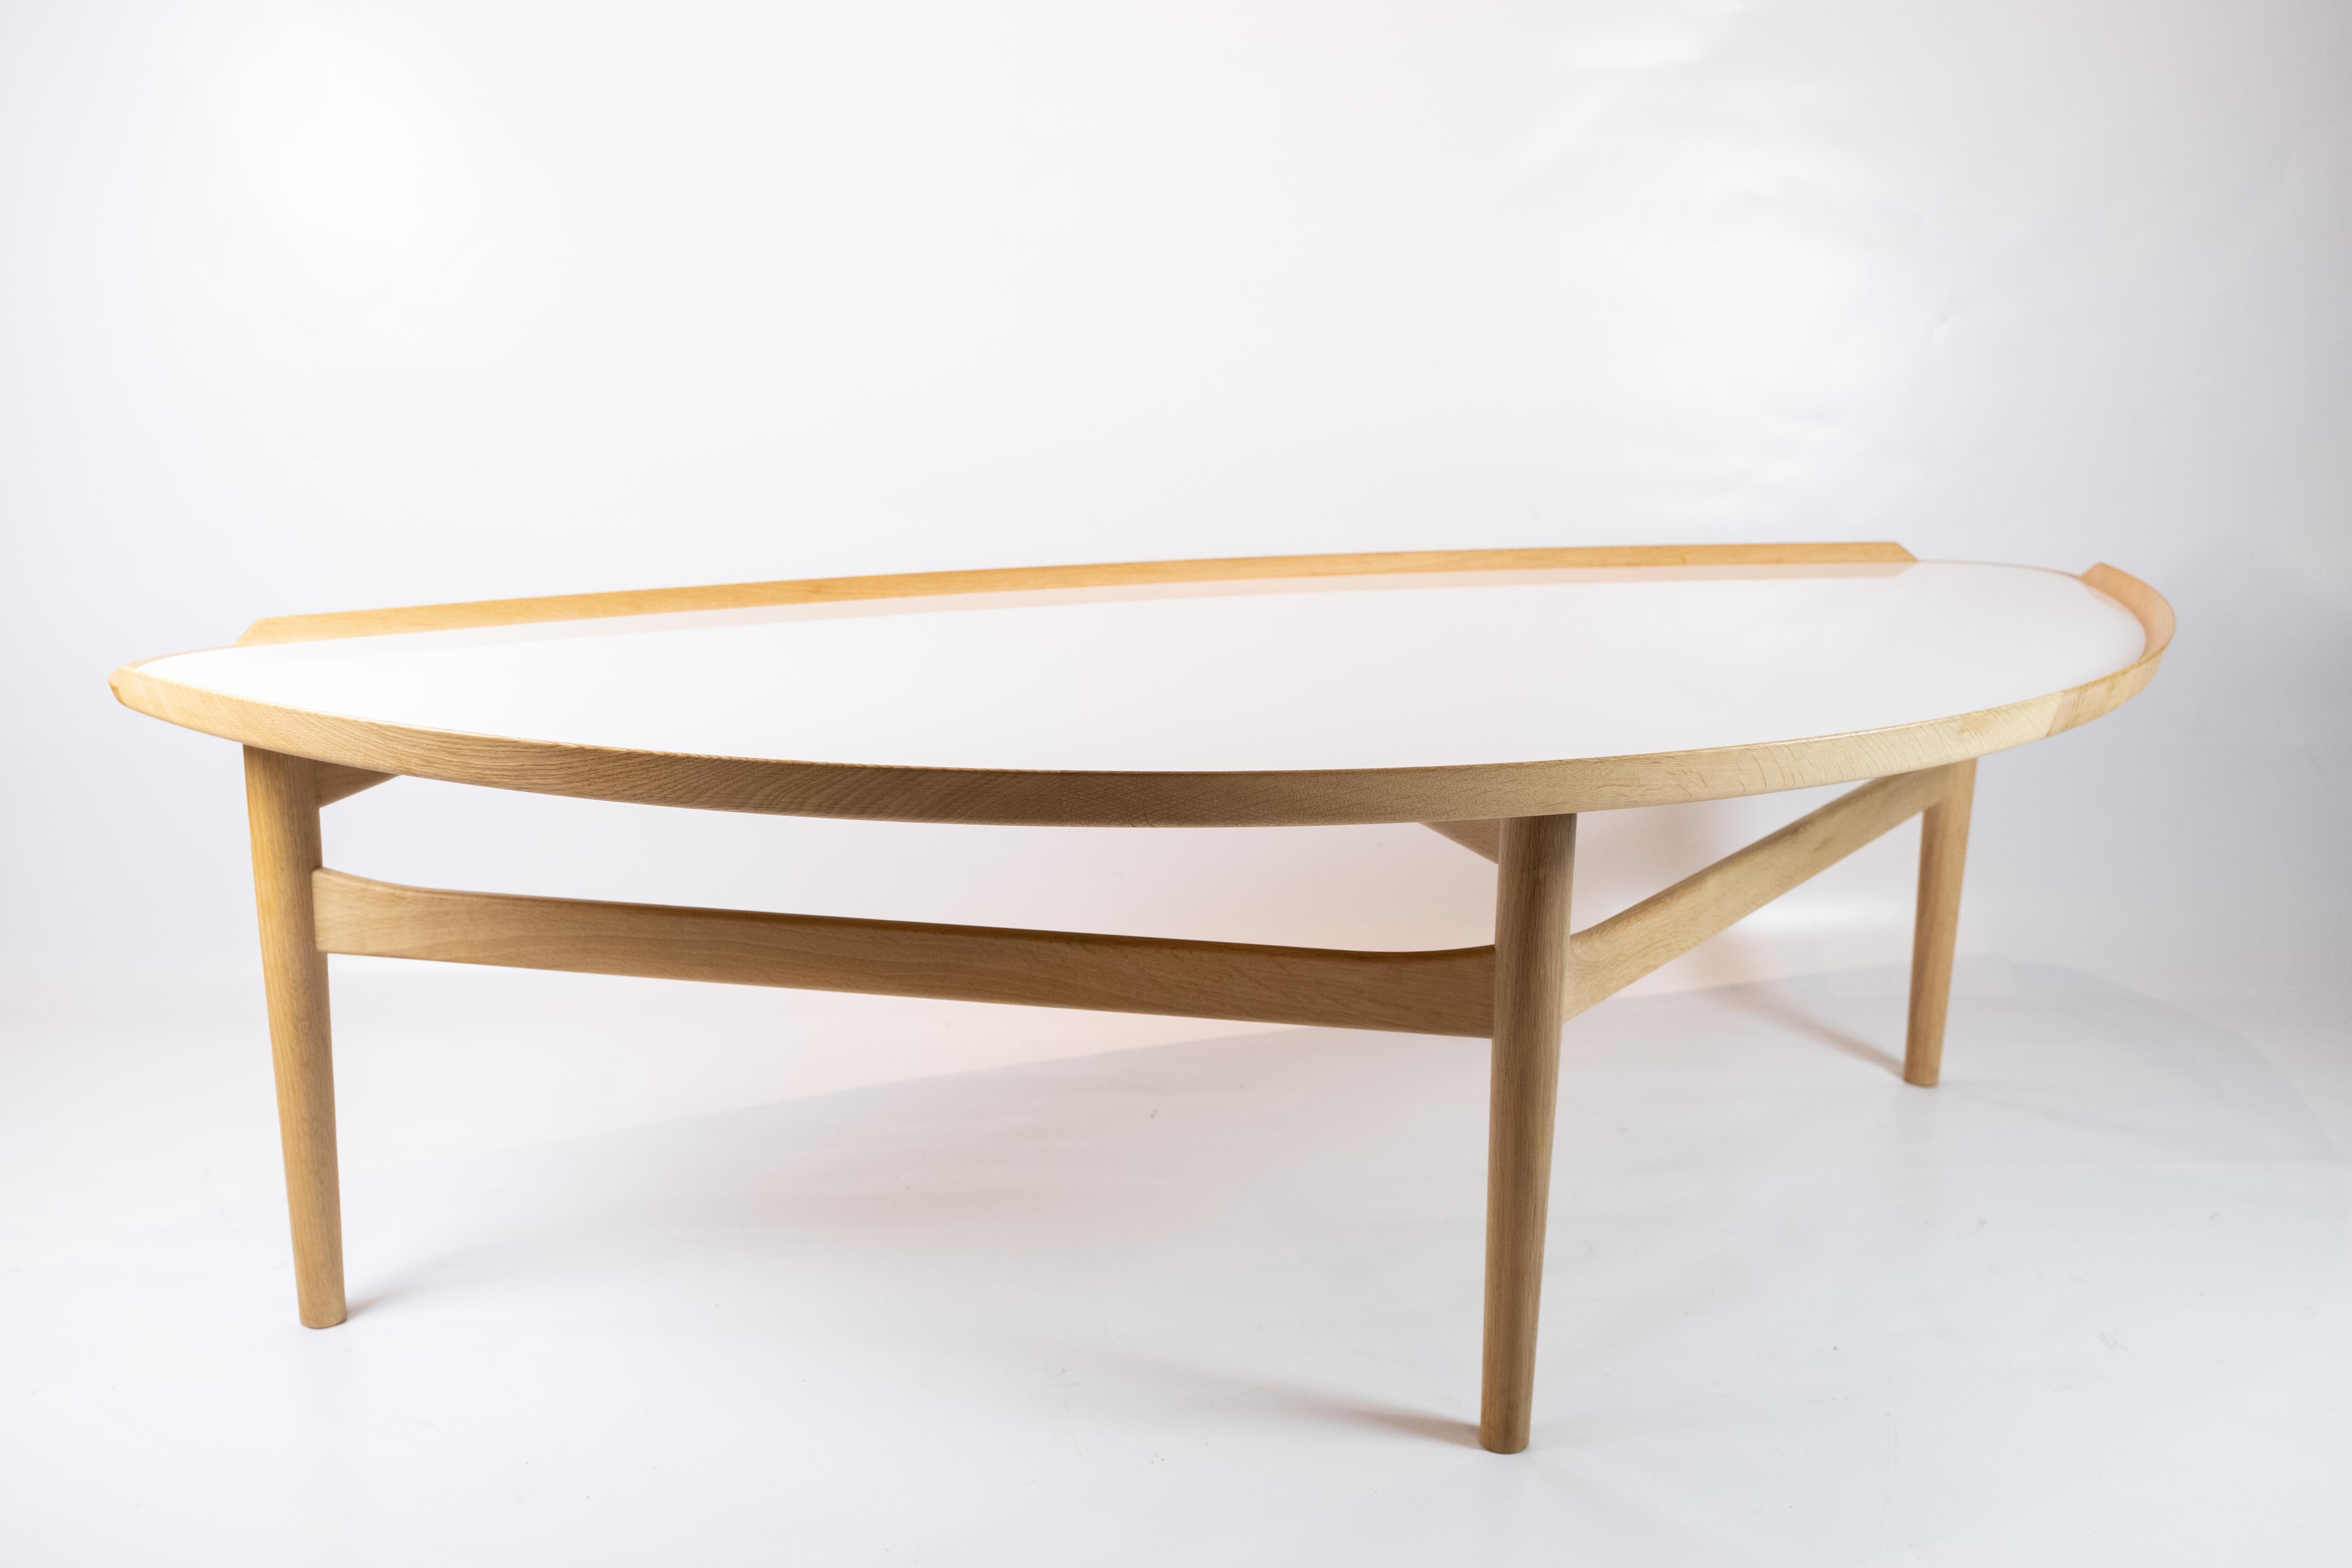 Cocktail table of oak and white laminate designed by Finn Juhl in 1951. The table was originally designed for the American company Baker Furniture and is in great vintage condition.
   